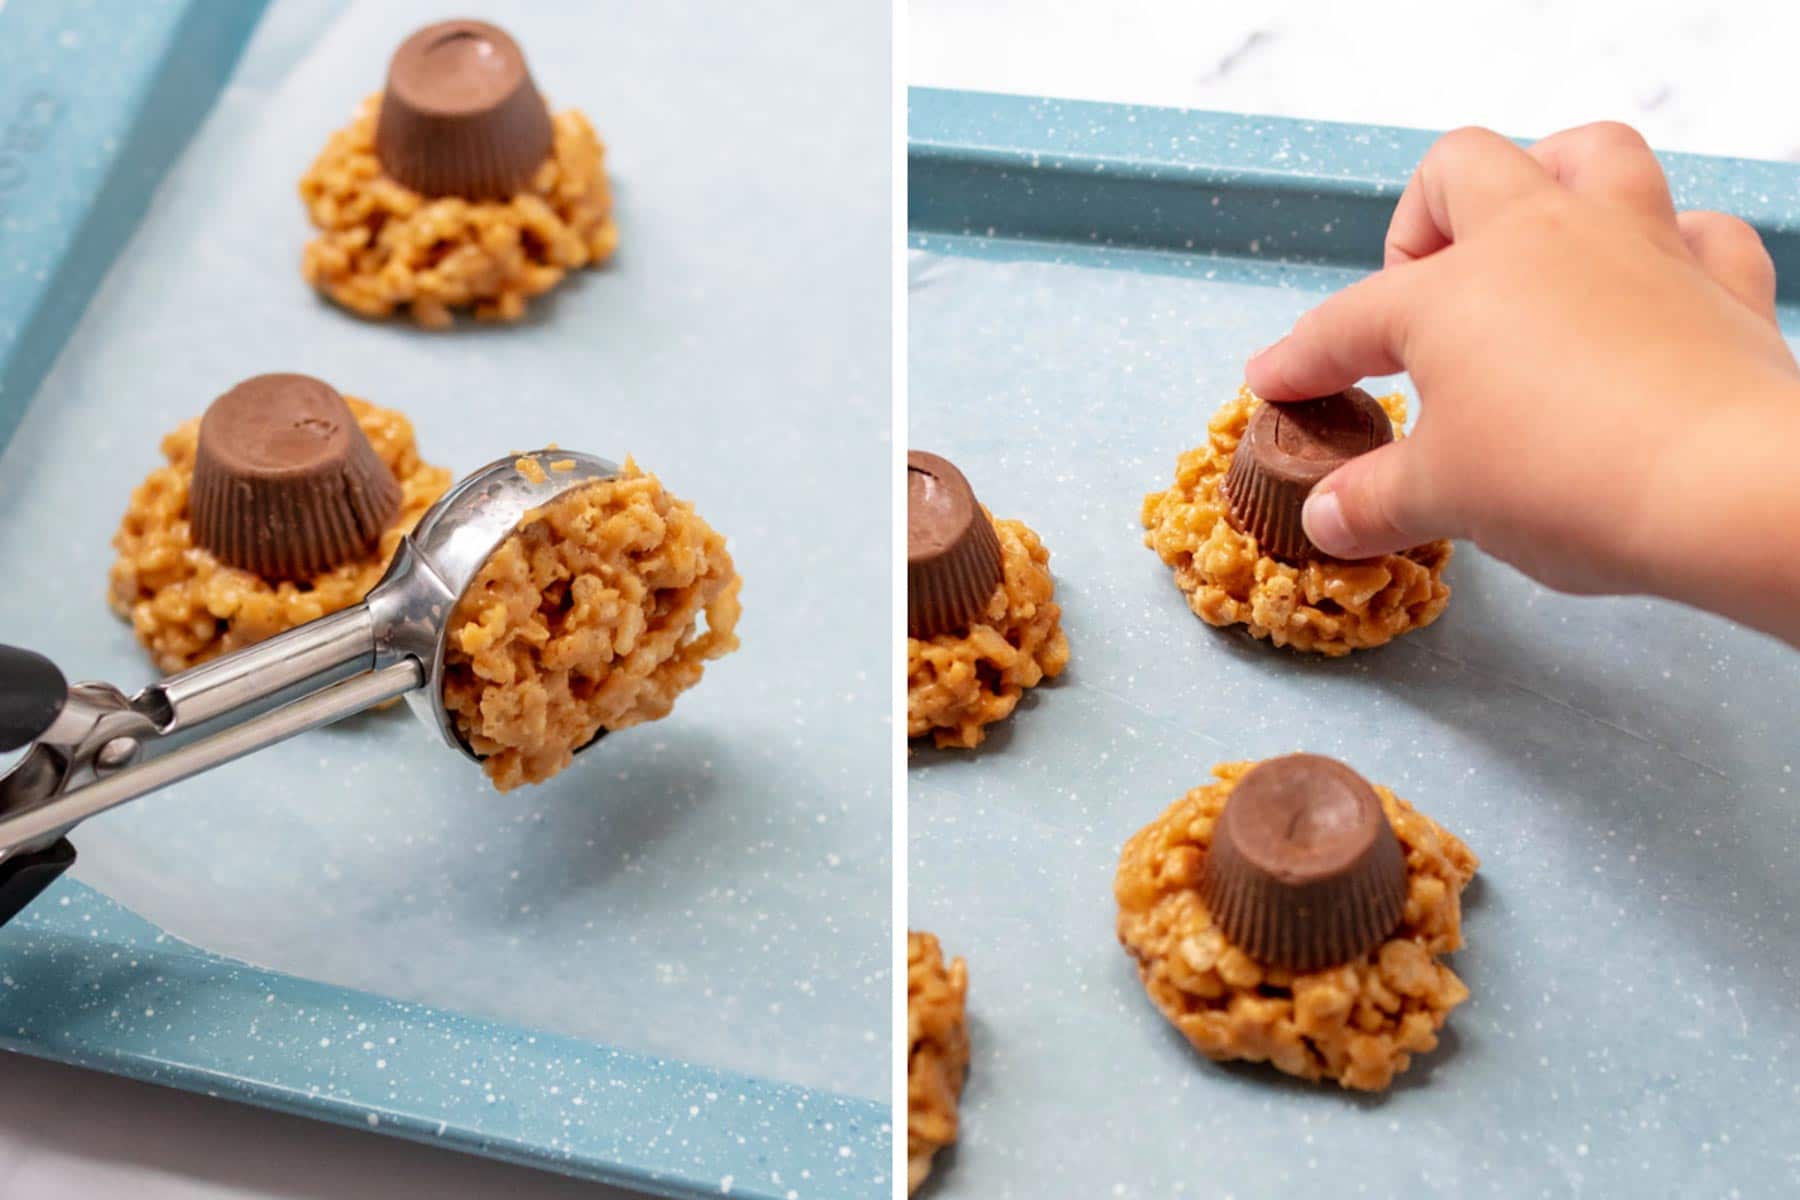 image showing it being scooped on baking sheet and peanut butter cup placed on